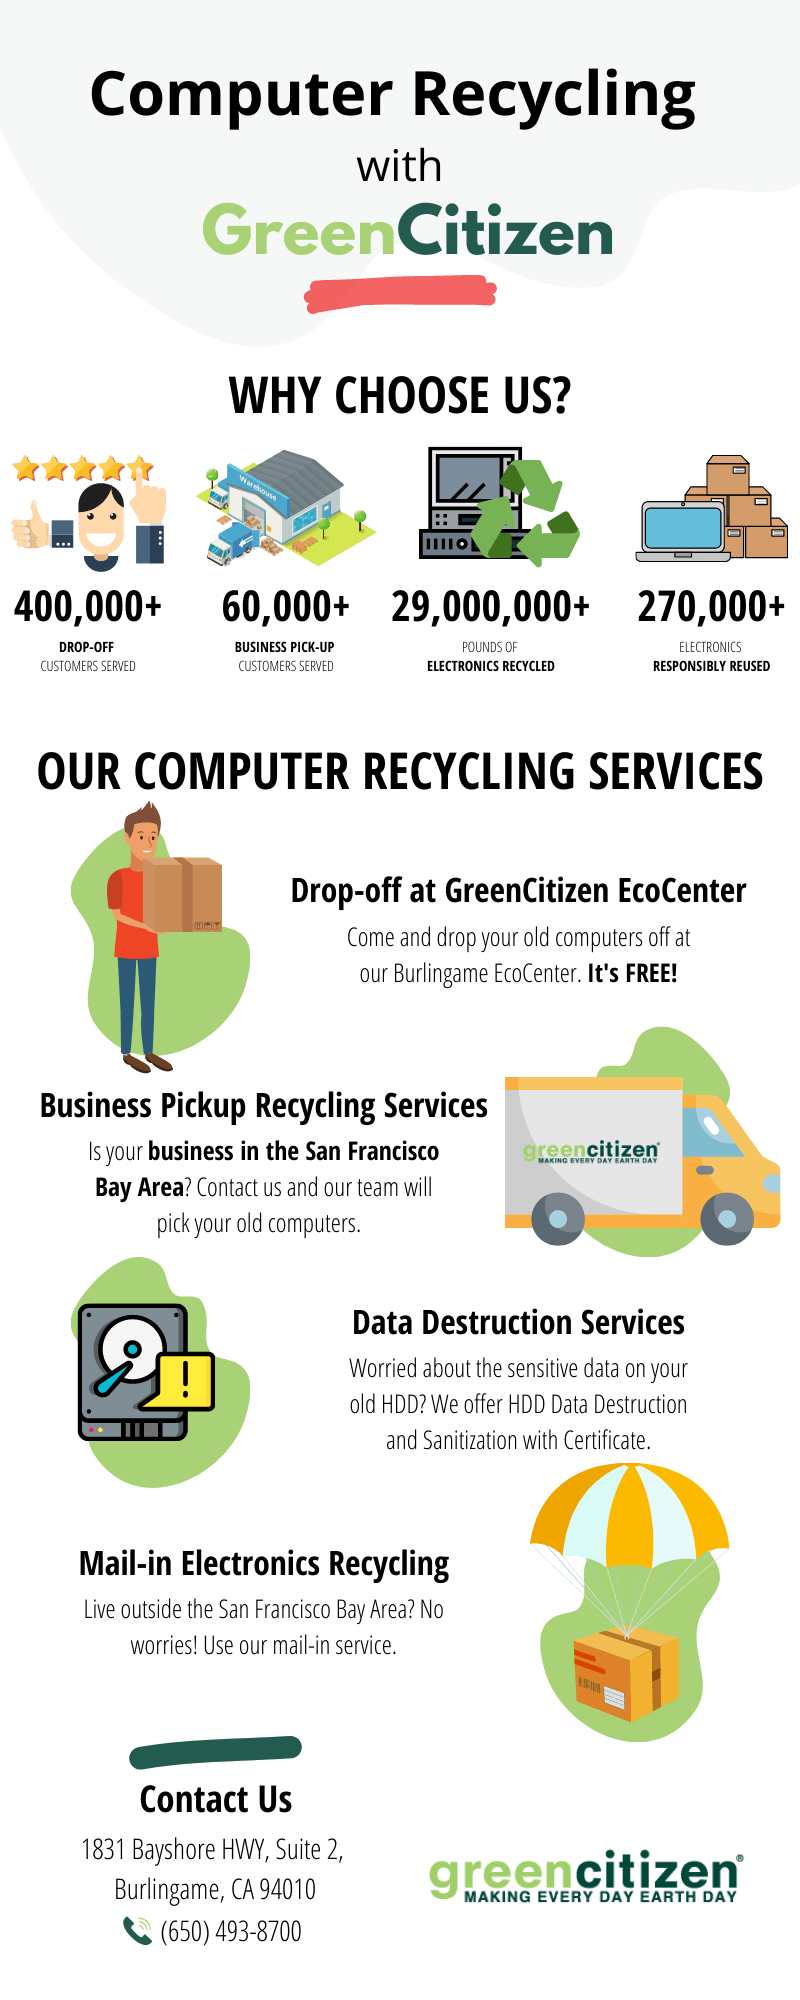 Computer Recycling with GreenCitizen